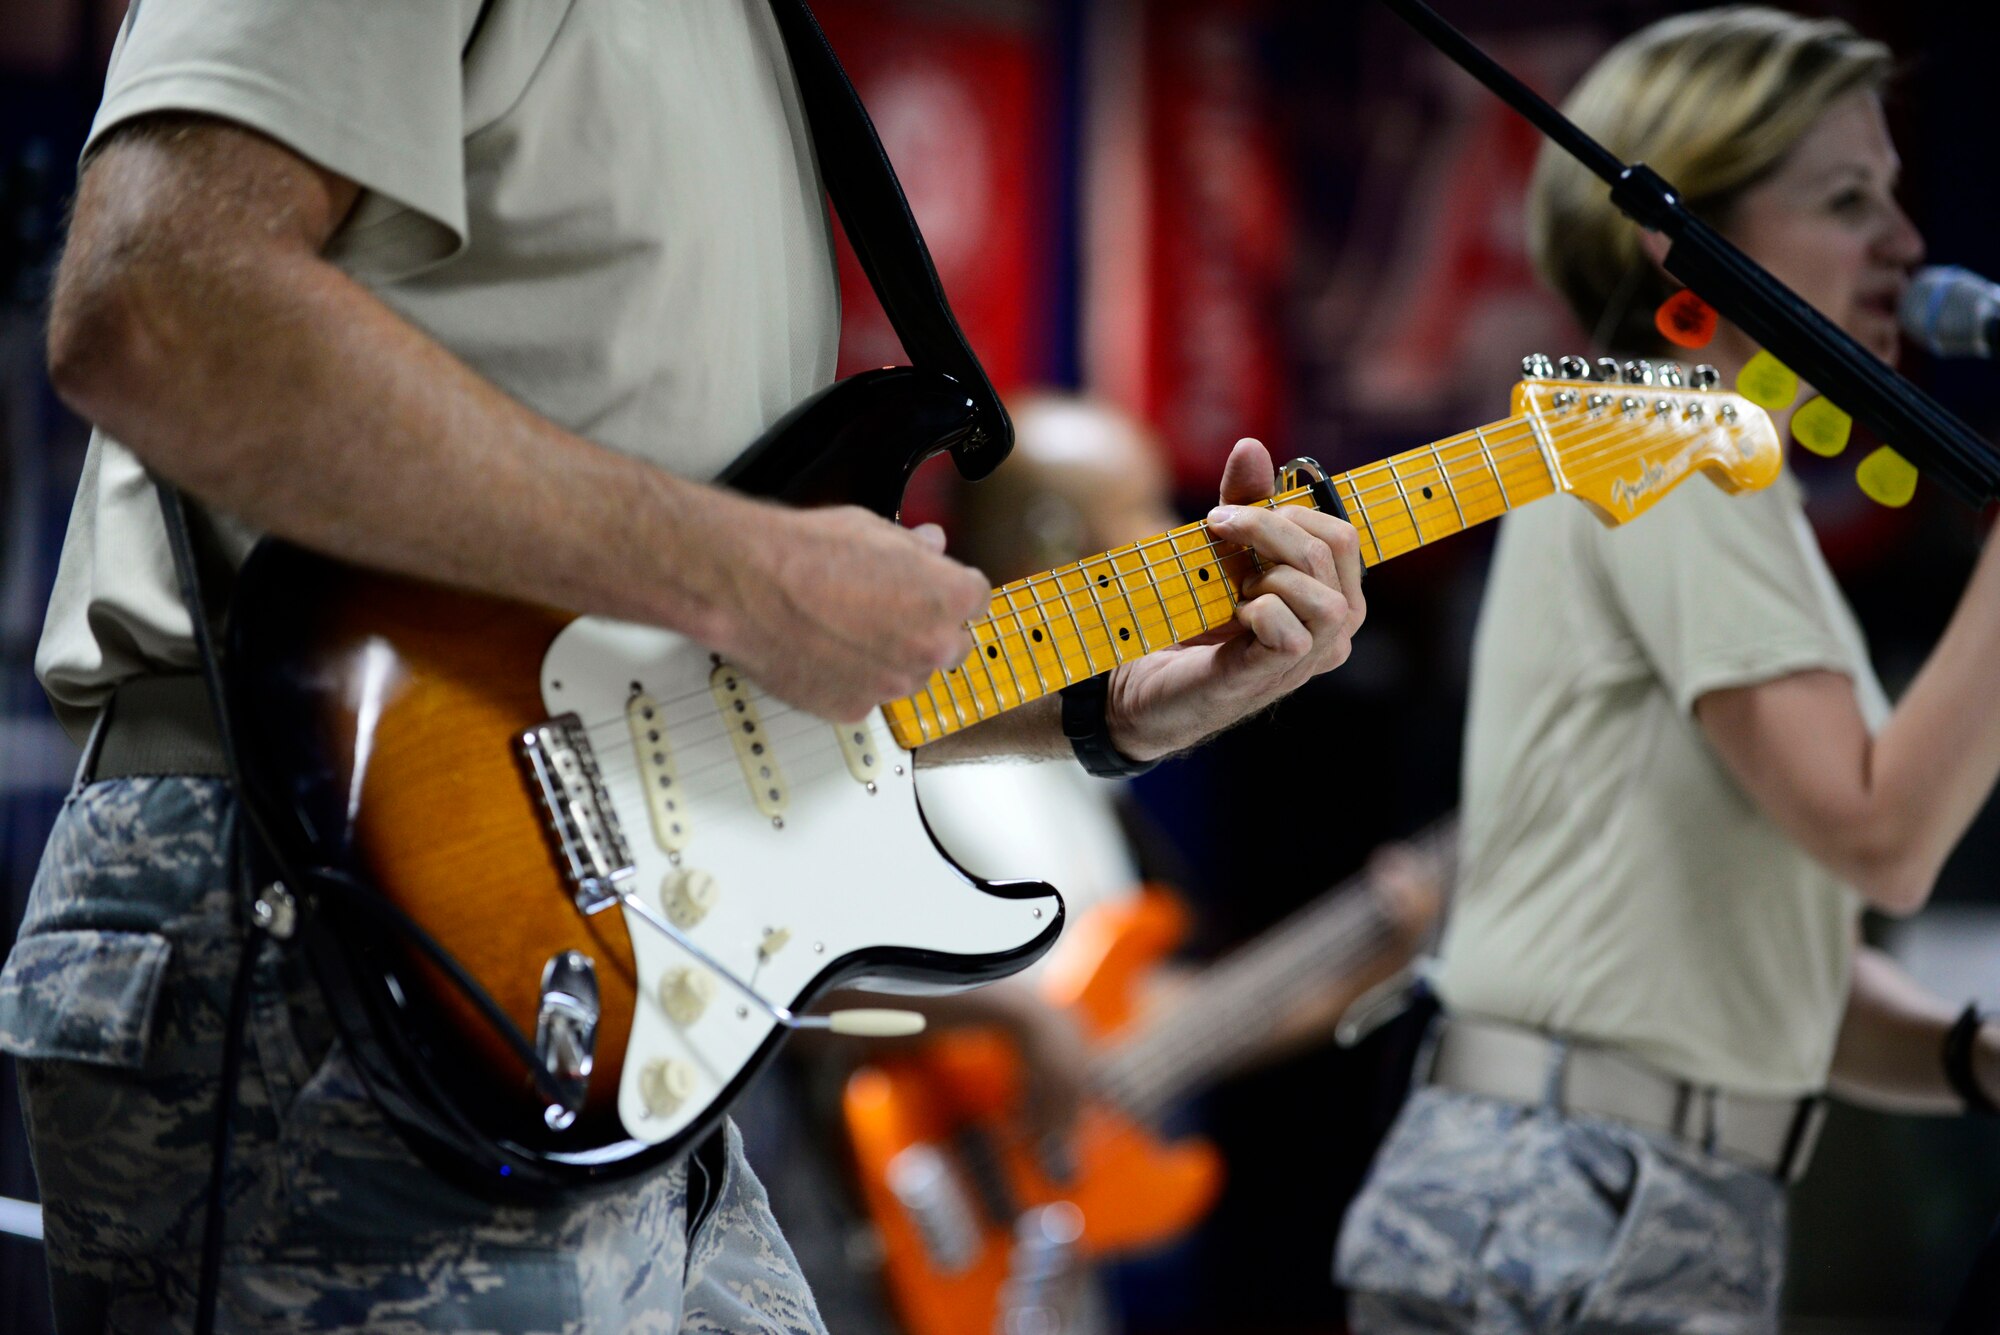 Staff Sgt. Darran Keenom, a U.S. Air Forces Central Command band vocalist, guitarist and harmonica player, strums a guitar during a performance at an undisclosed location in Southwest Asia July 6, 2015. The band played several genres of music to appeal to all ages. (U.S. Air Force photo/Senior Airman Racheal E. Watson)